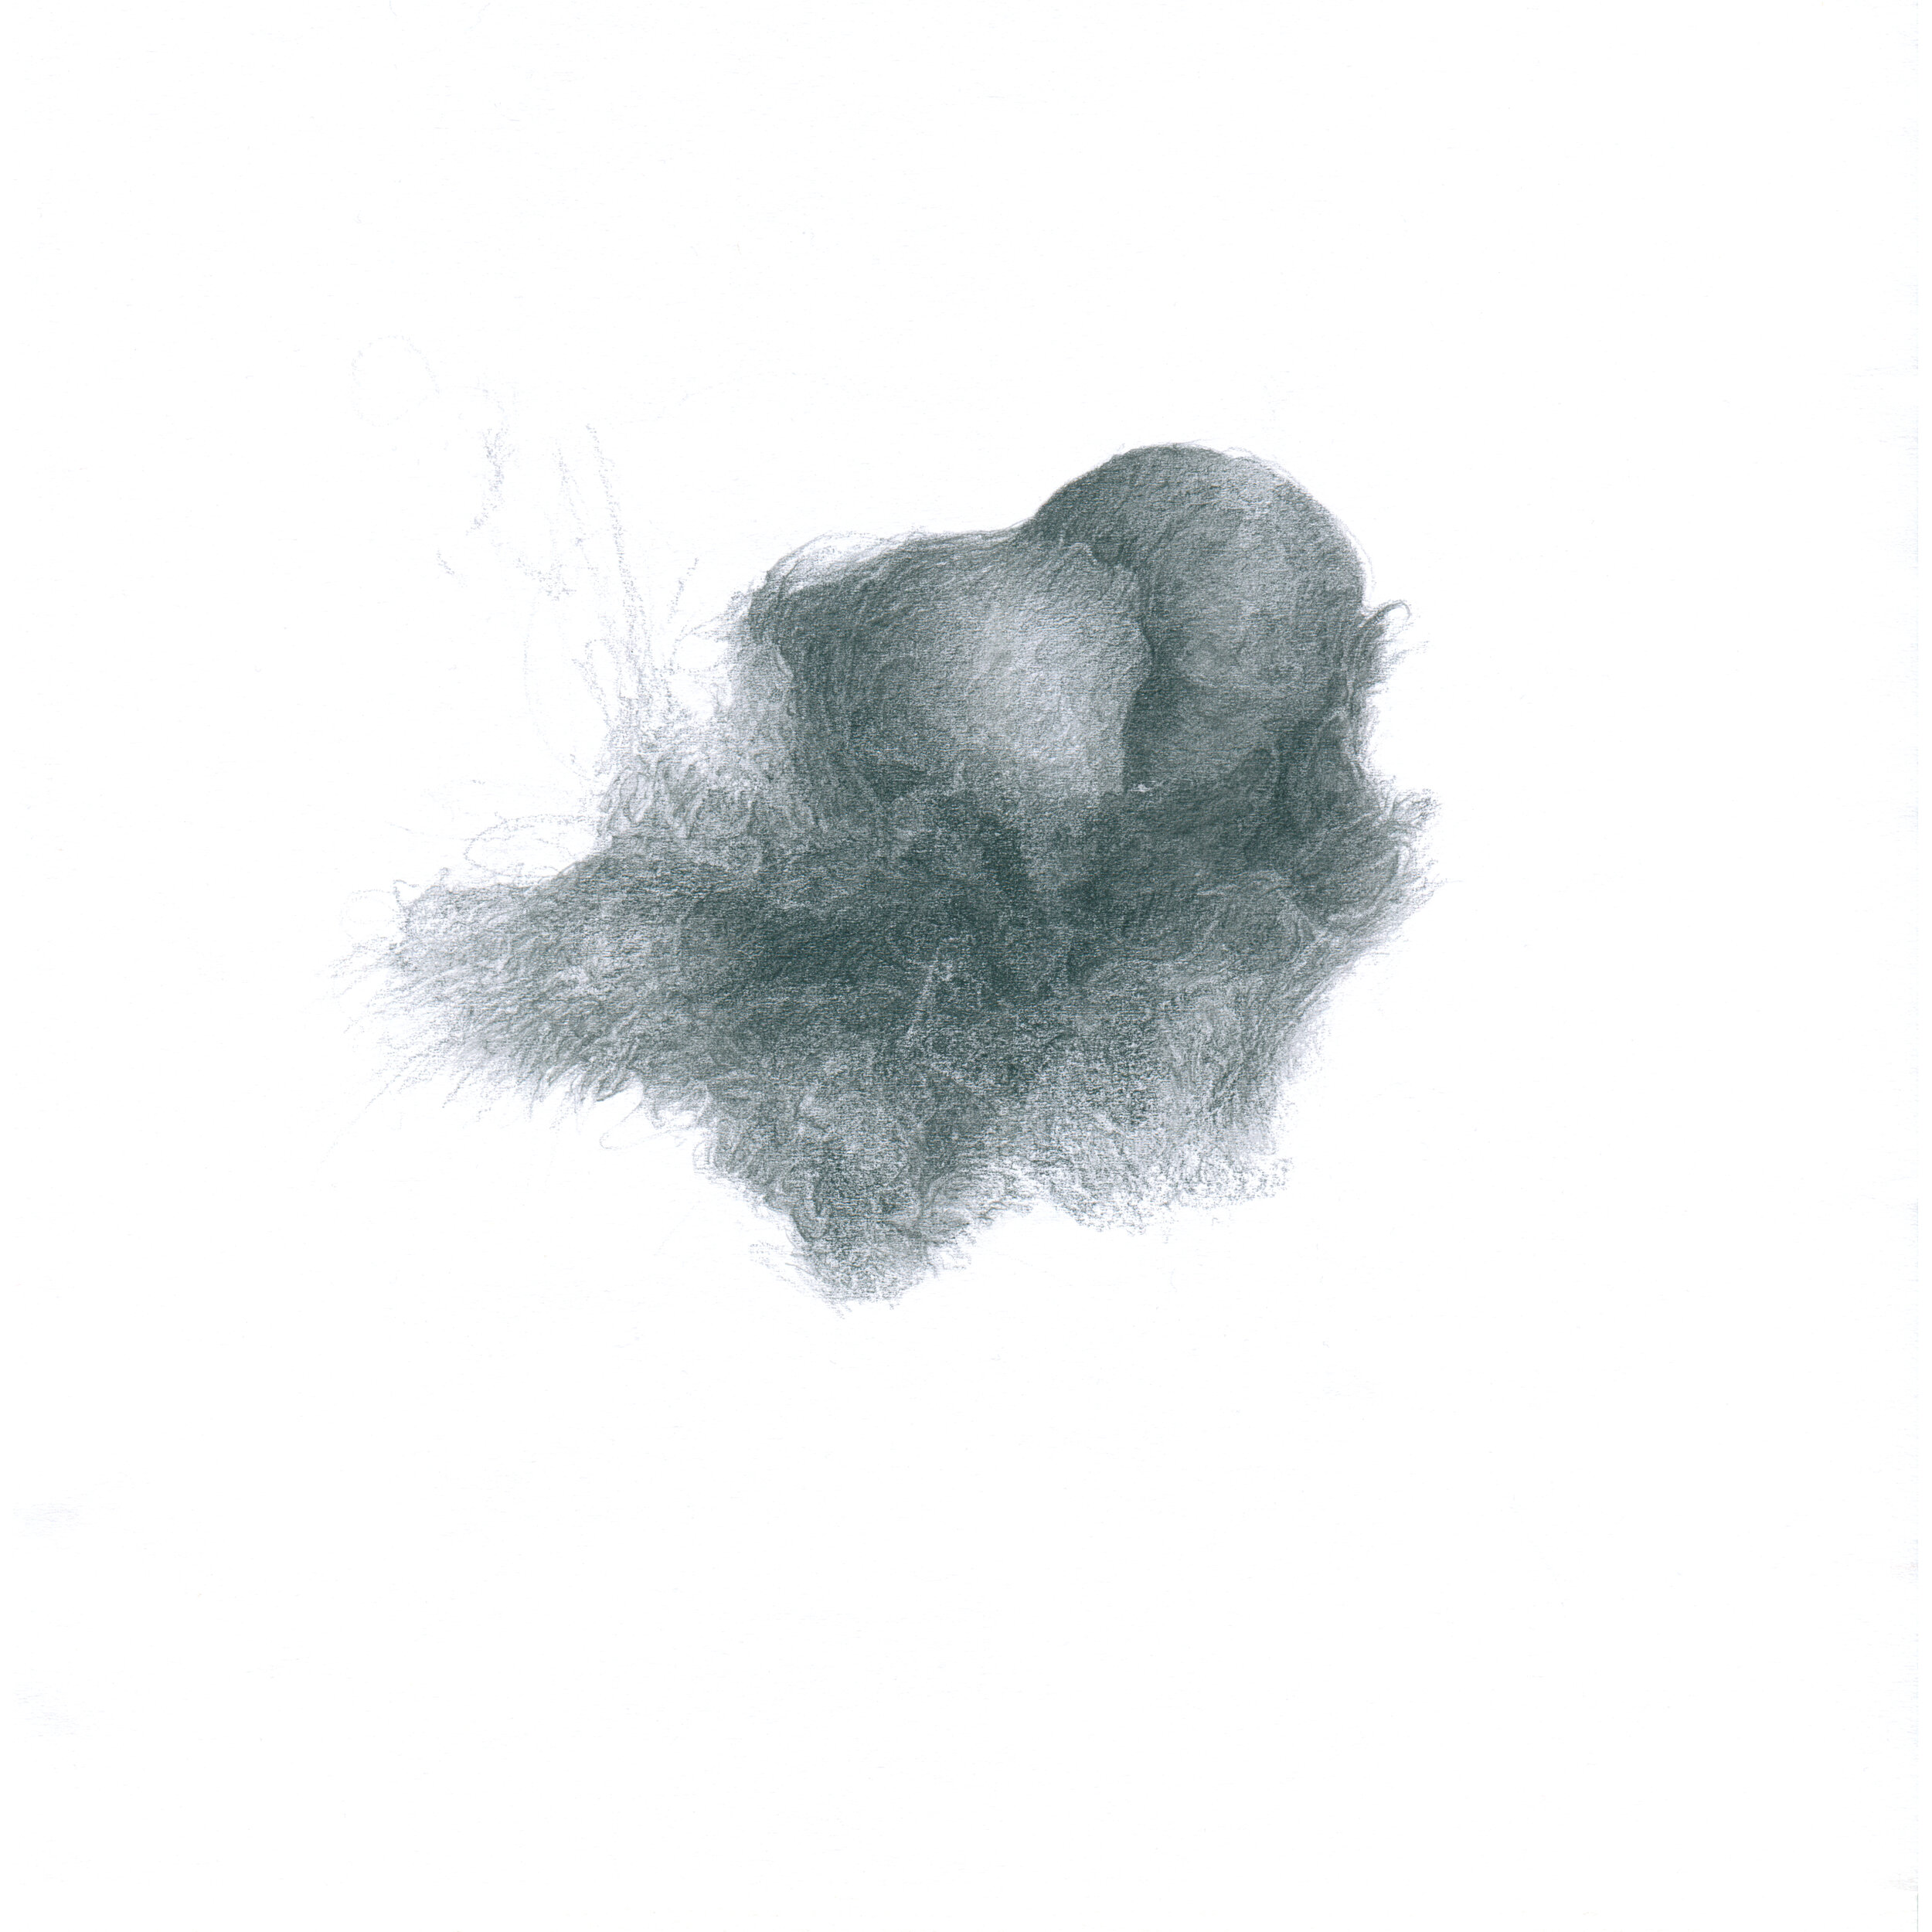  Drawing #17, 2013  Graphite on paper, 21.5 x 21.5 cm 